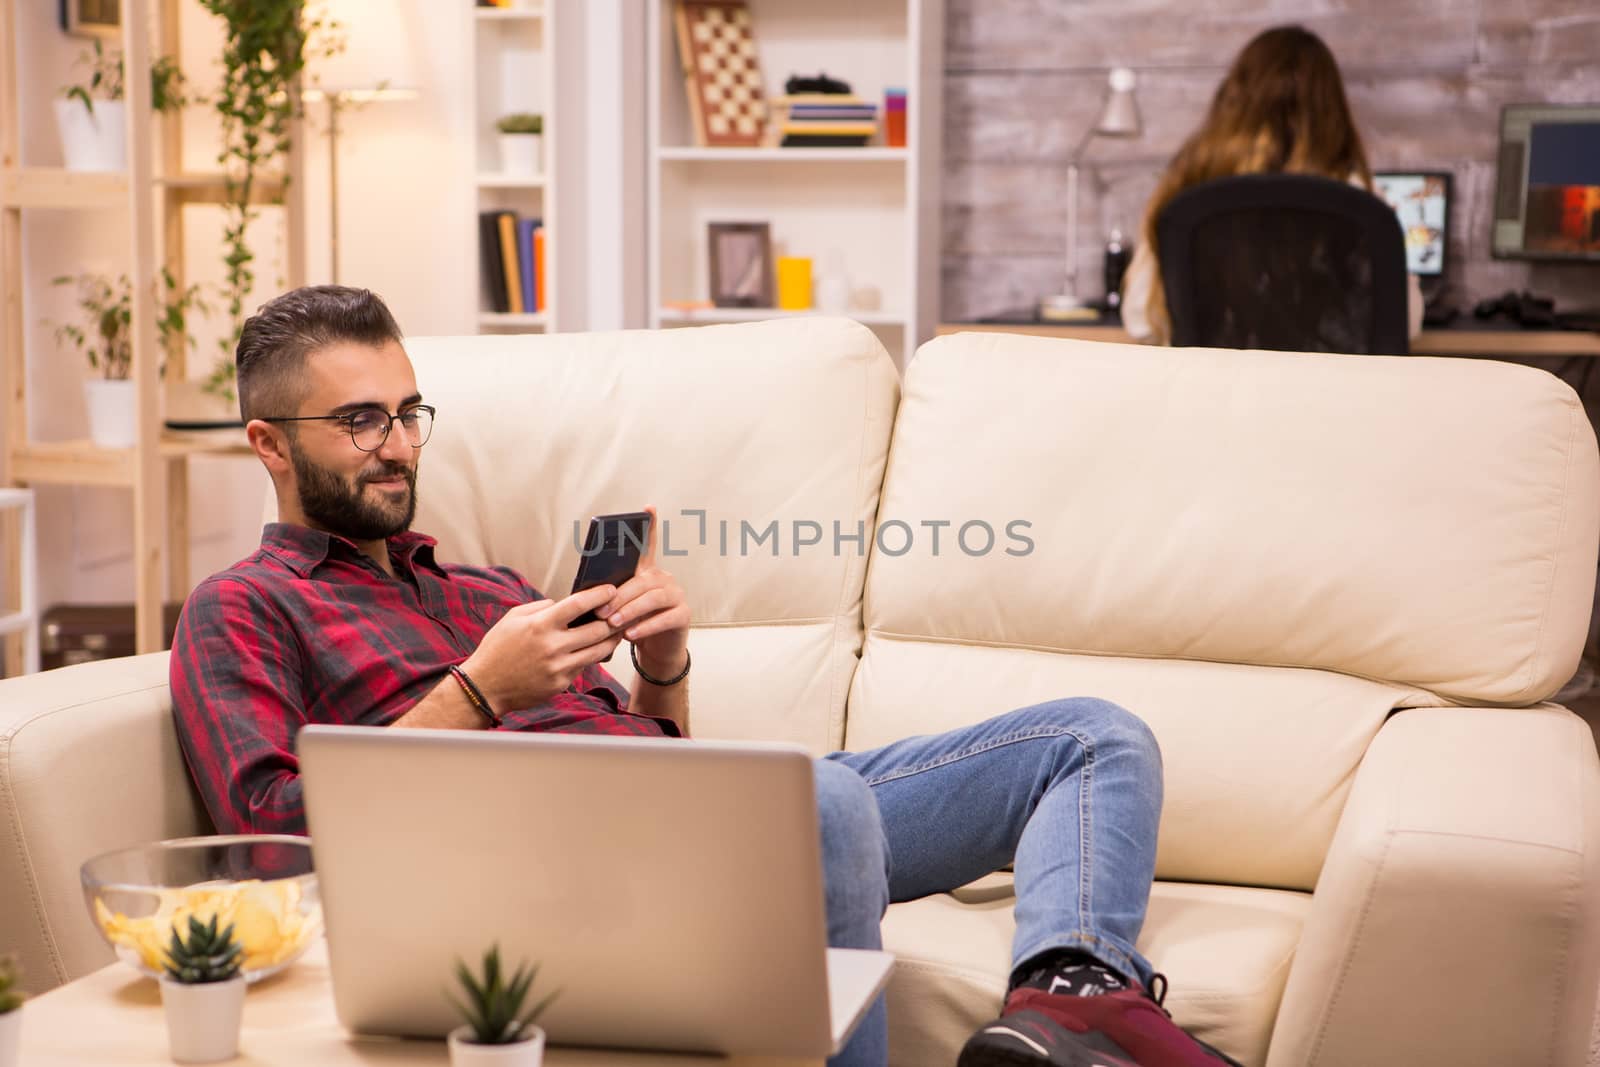 Bearded freelancer sitting on couch and browsing on his phone. Girlfriend in the background.